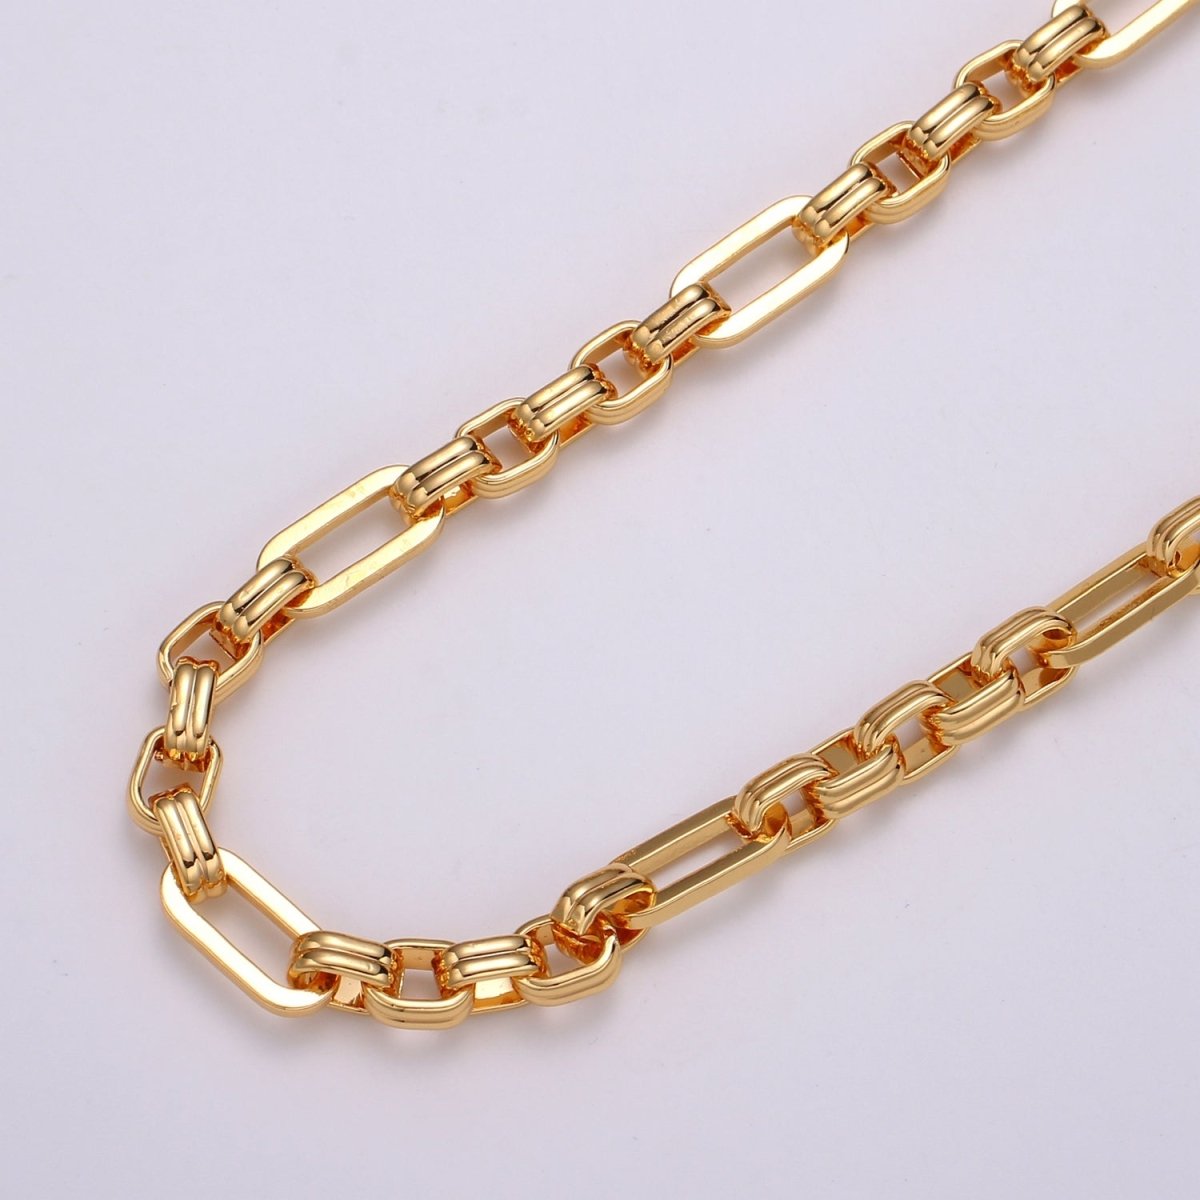 24K Gold Filled Figaro Long and Short Fancy Chain by Yard, Link Square CABLE Elongate Chain, Wholesale Roll Chain For Jewelry Necklace Bracelet Anklet Making | ROLL-422 Clearance Pricing - DLUXCA